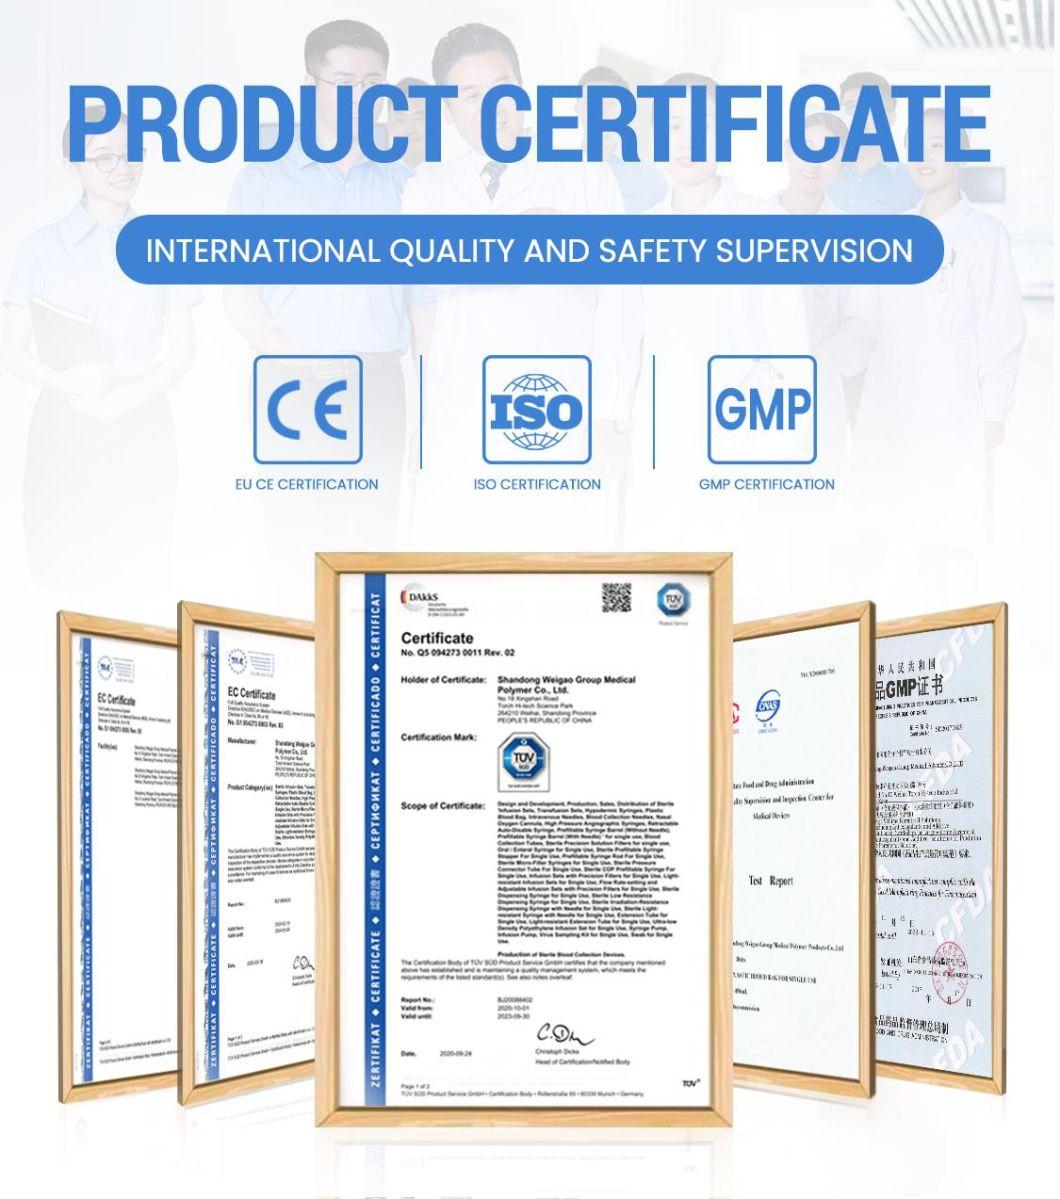 CE/ISO Approved 450ml Single Cpda-1 Welding Blood Bag